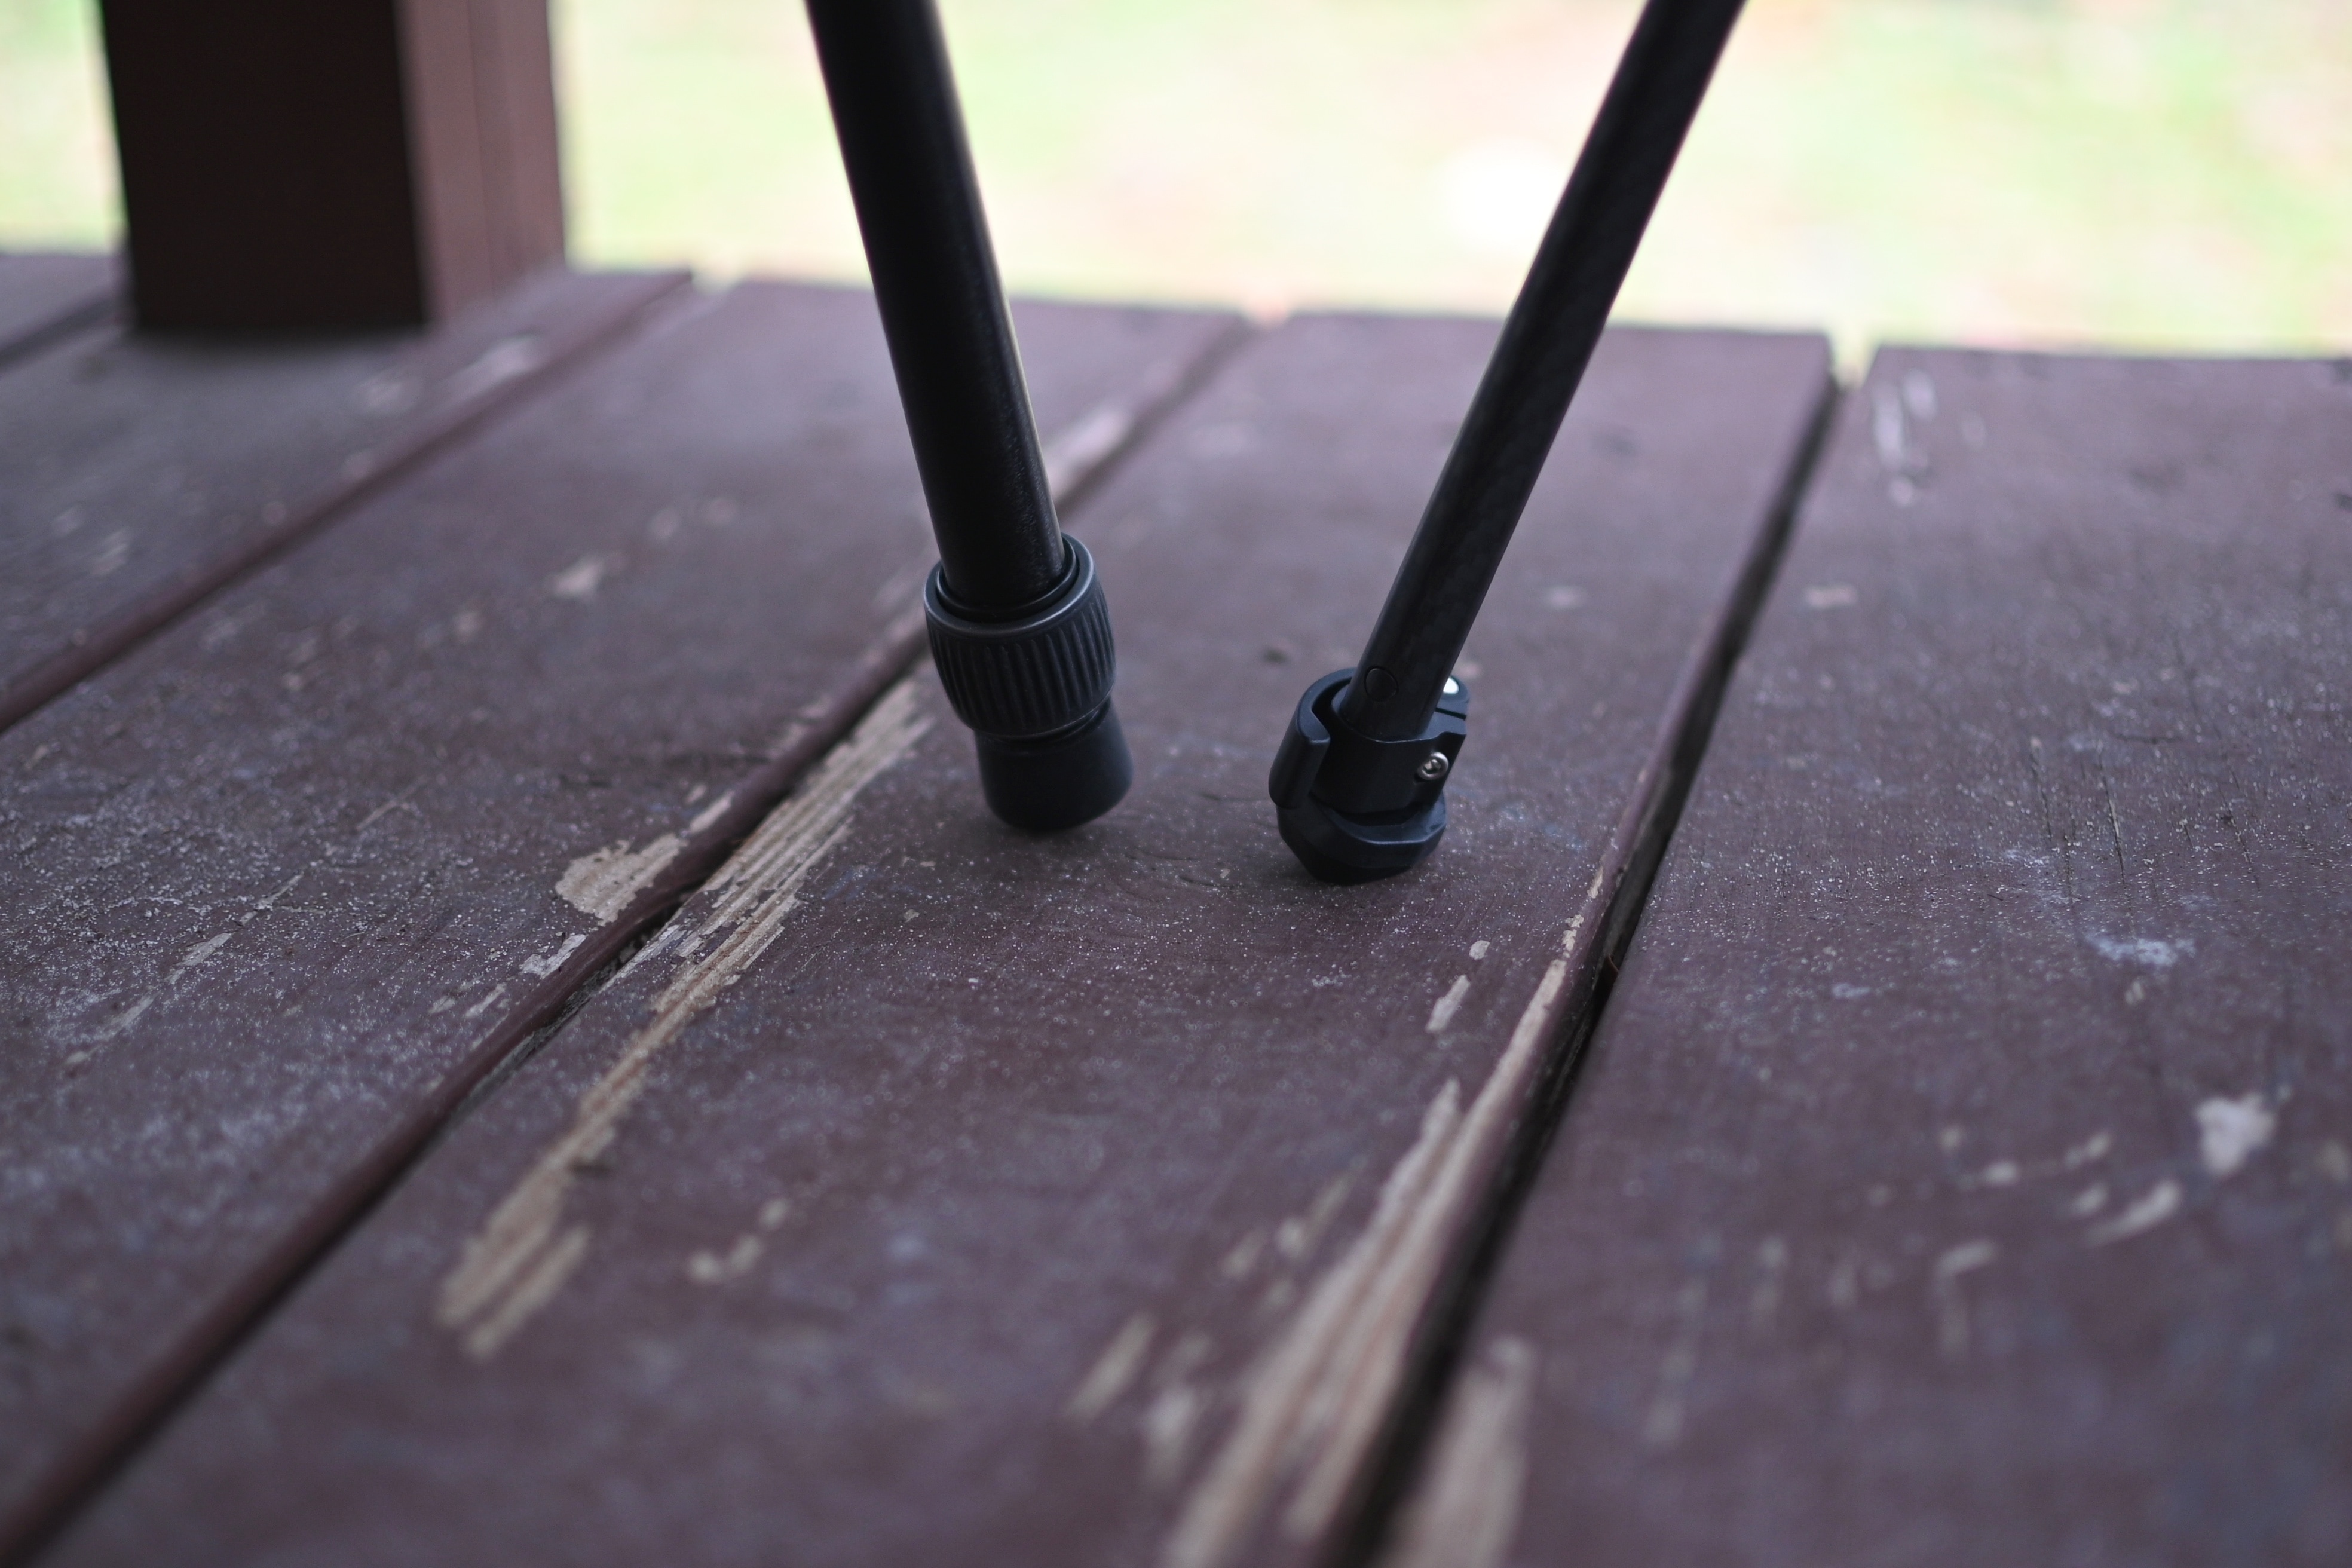 Peak Design travel tripod feet (right) compared with ordinary tripod rounded feet (left).